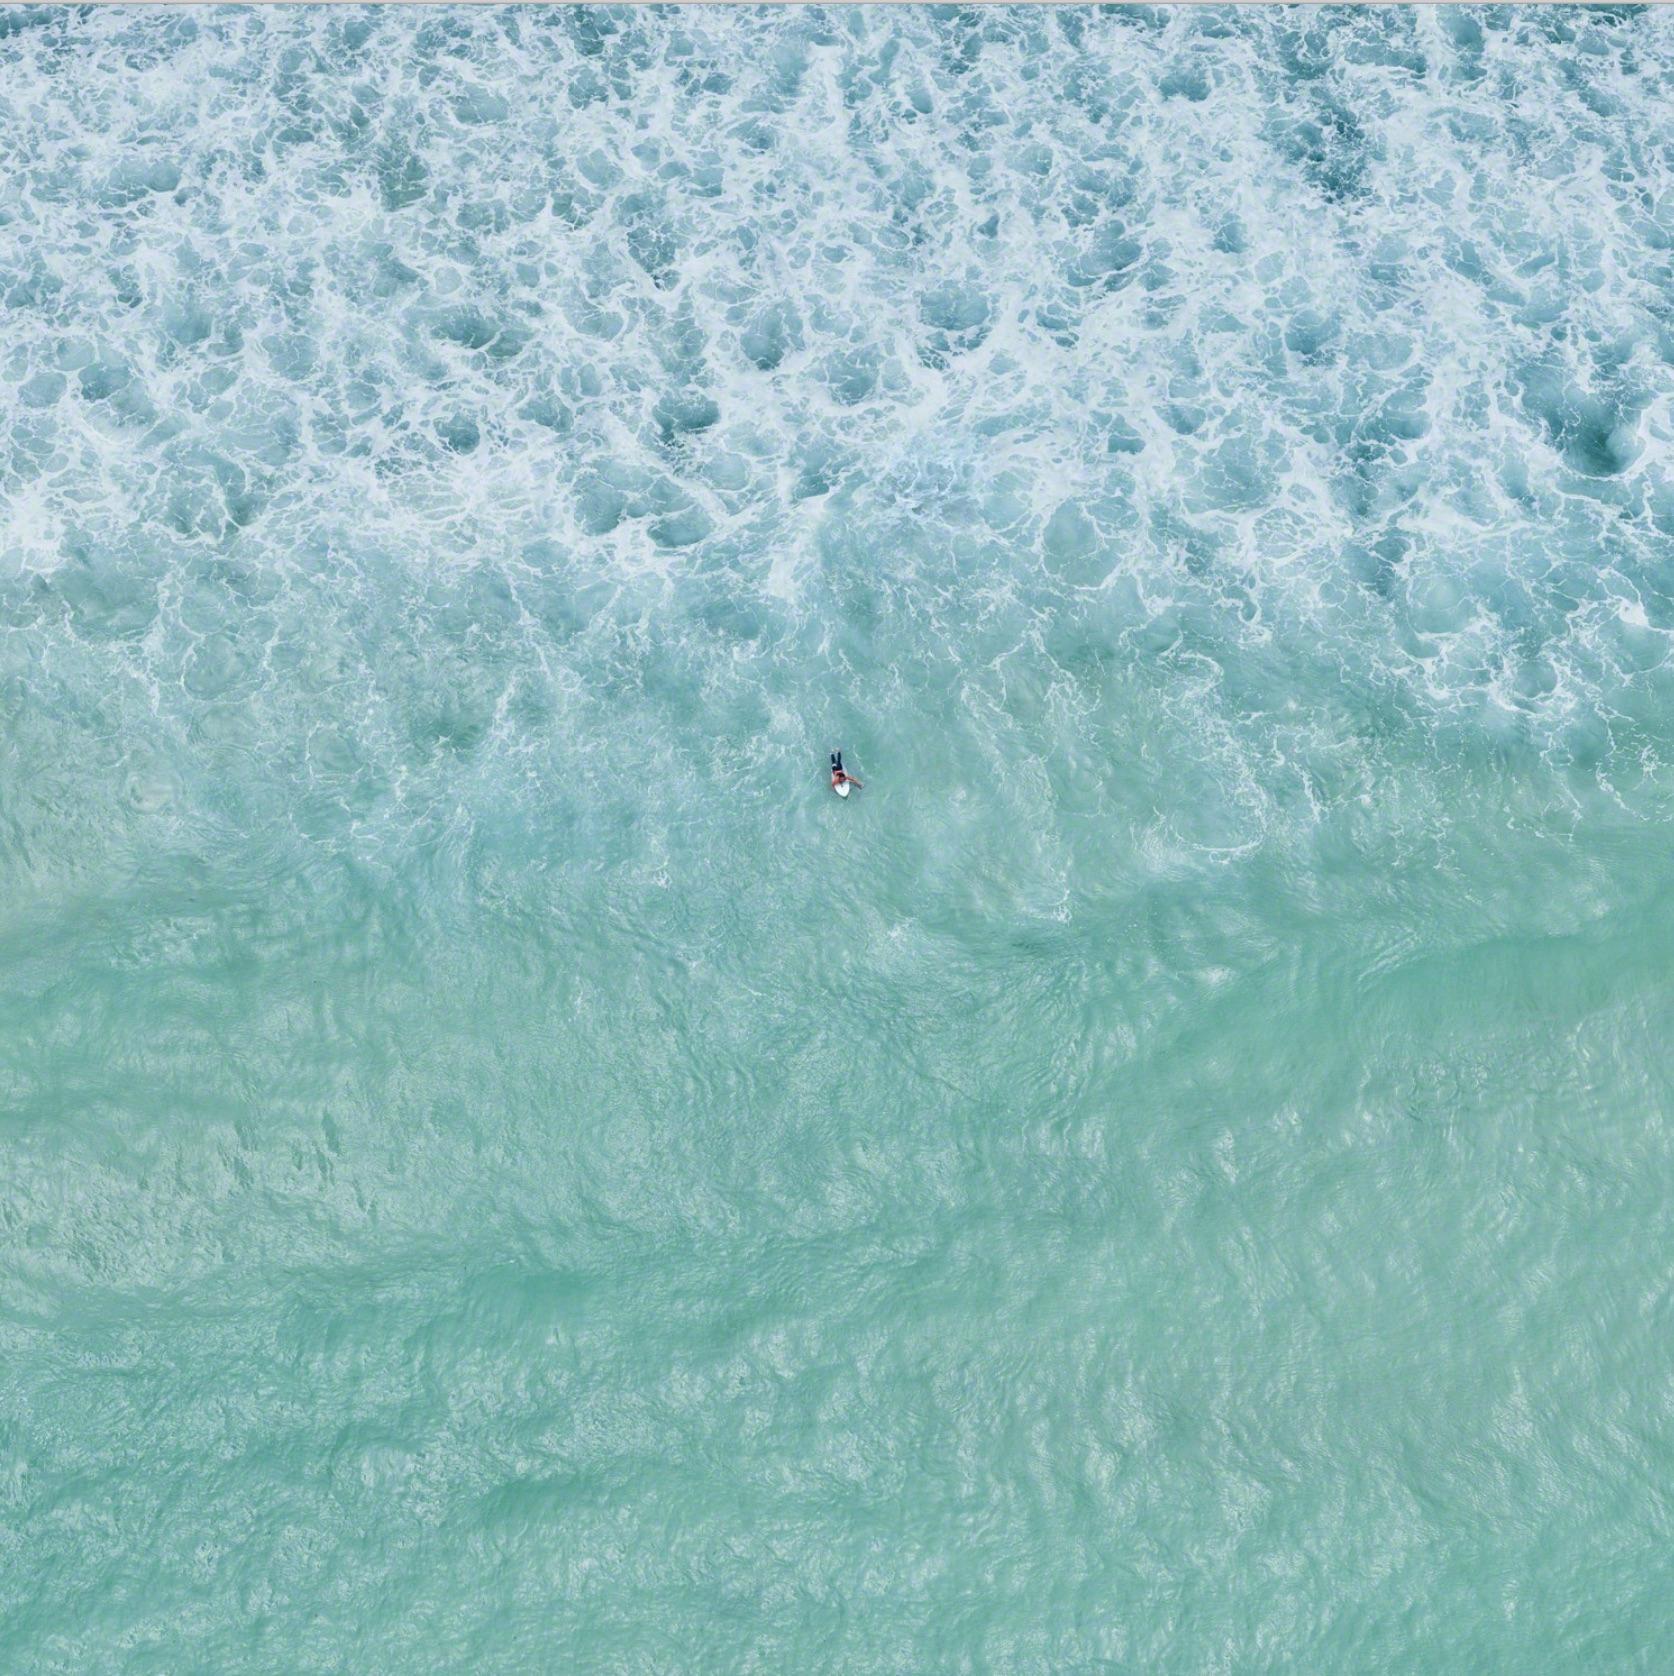 Surfer Perth - Photograph by David Burdeny